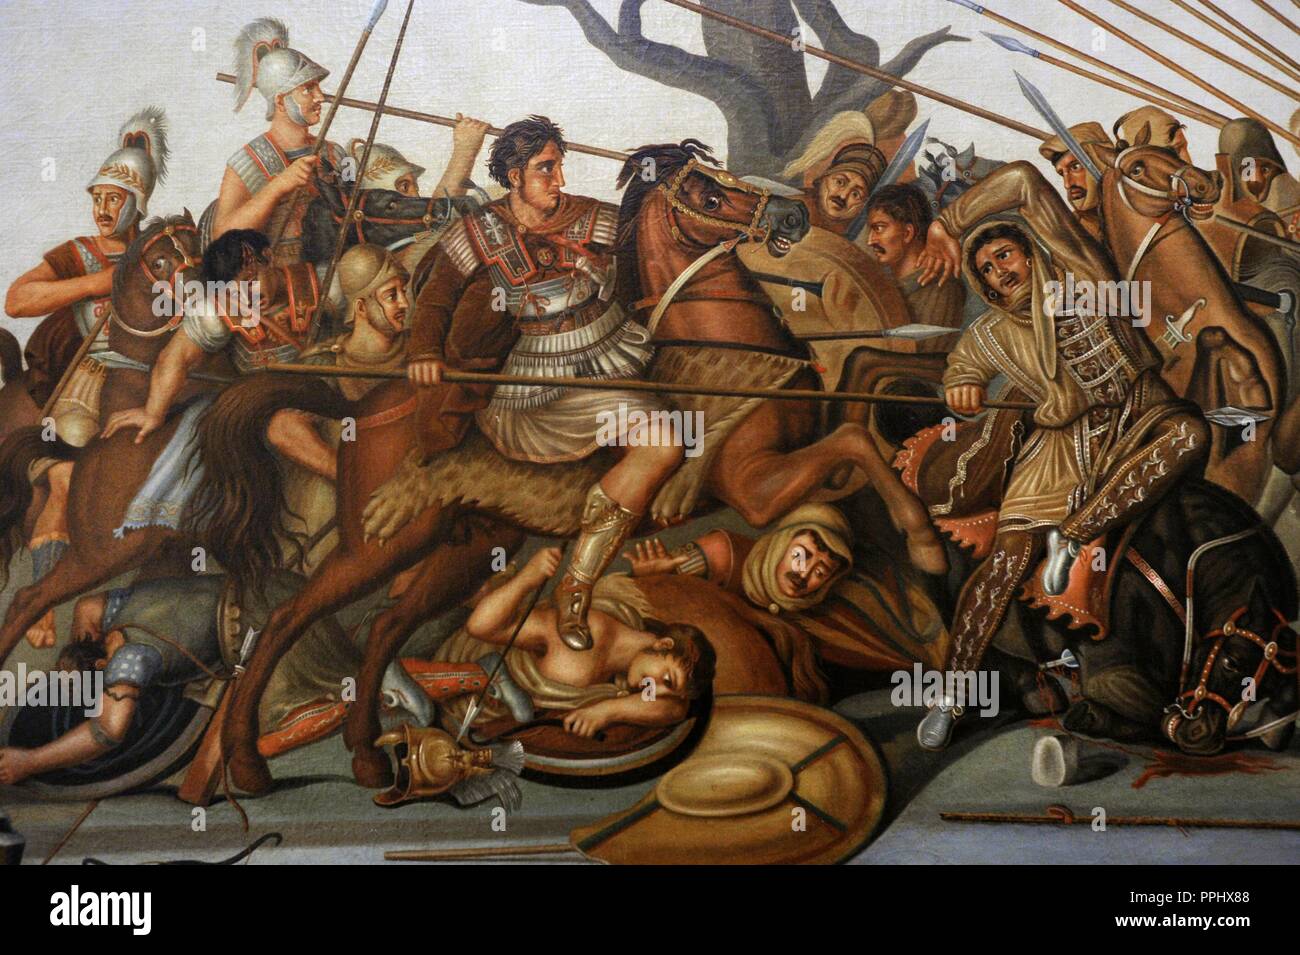 Modern reconstruction of Battle of Issus, between Alexander the Great and the Achaemenid Empire, Darius III. Painting. National Archaeological Museum, Naples. Italy. Stock Photo